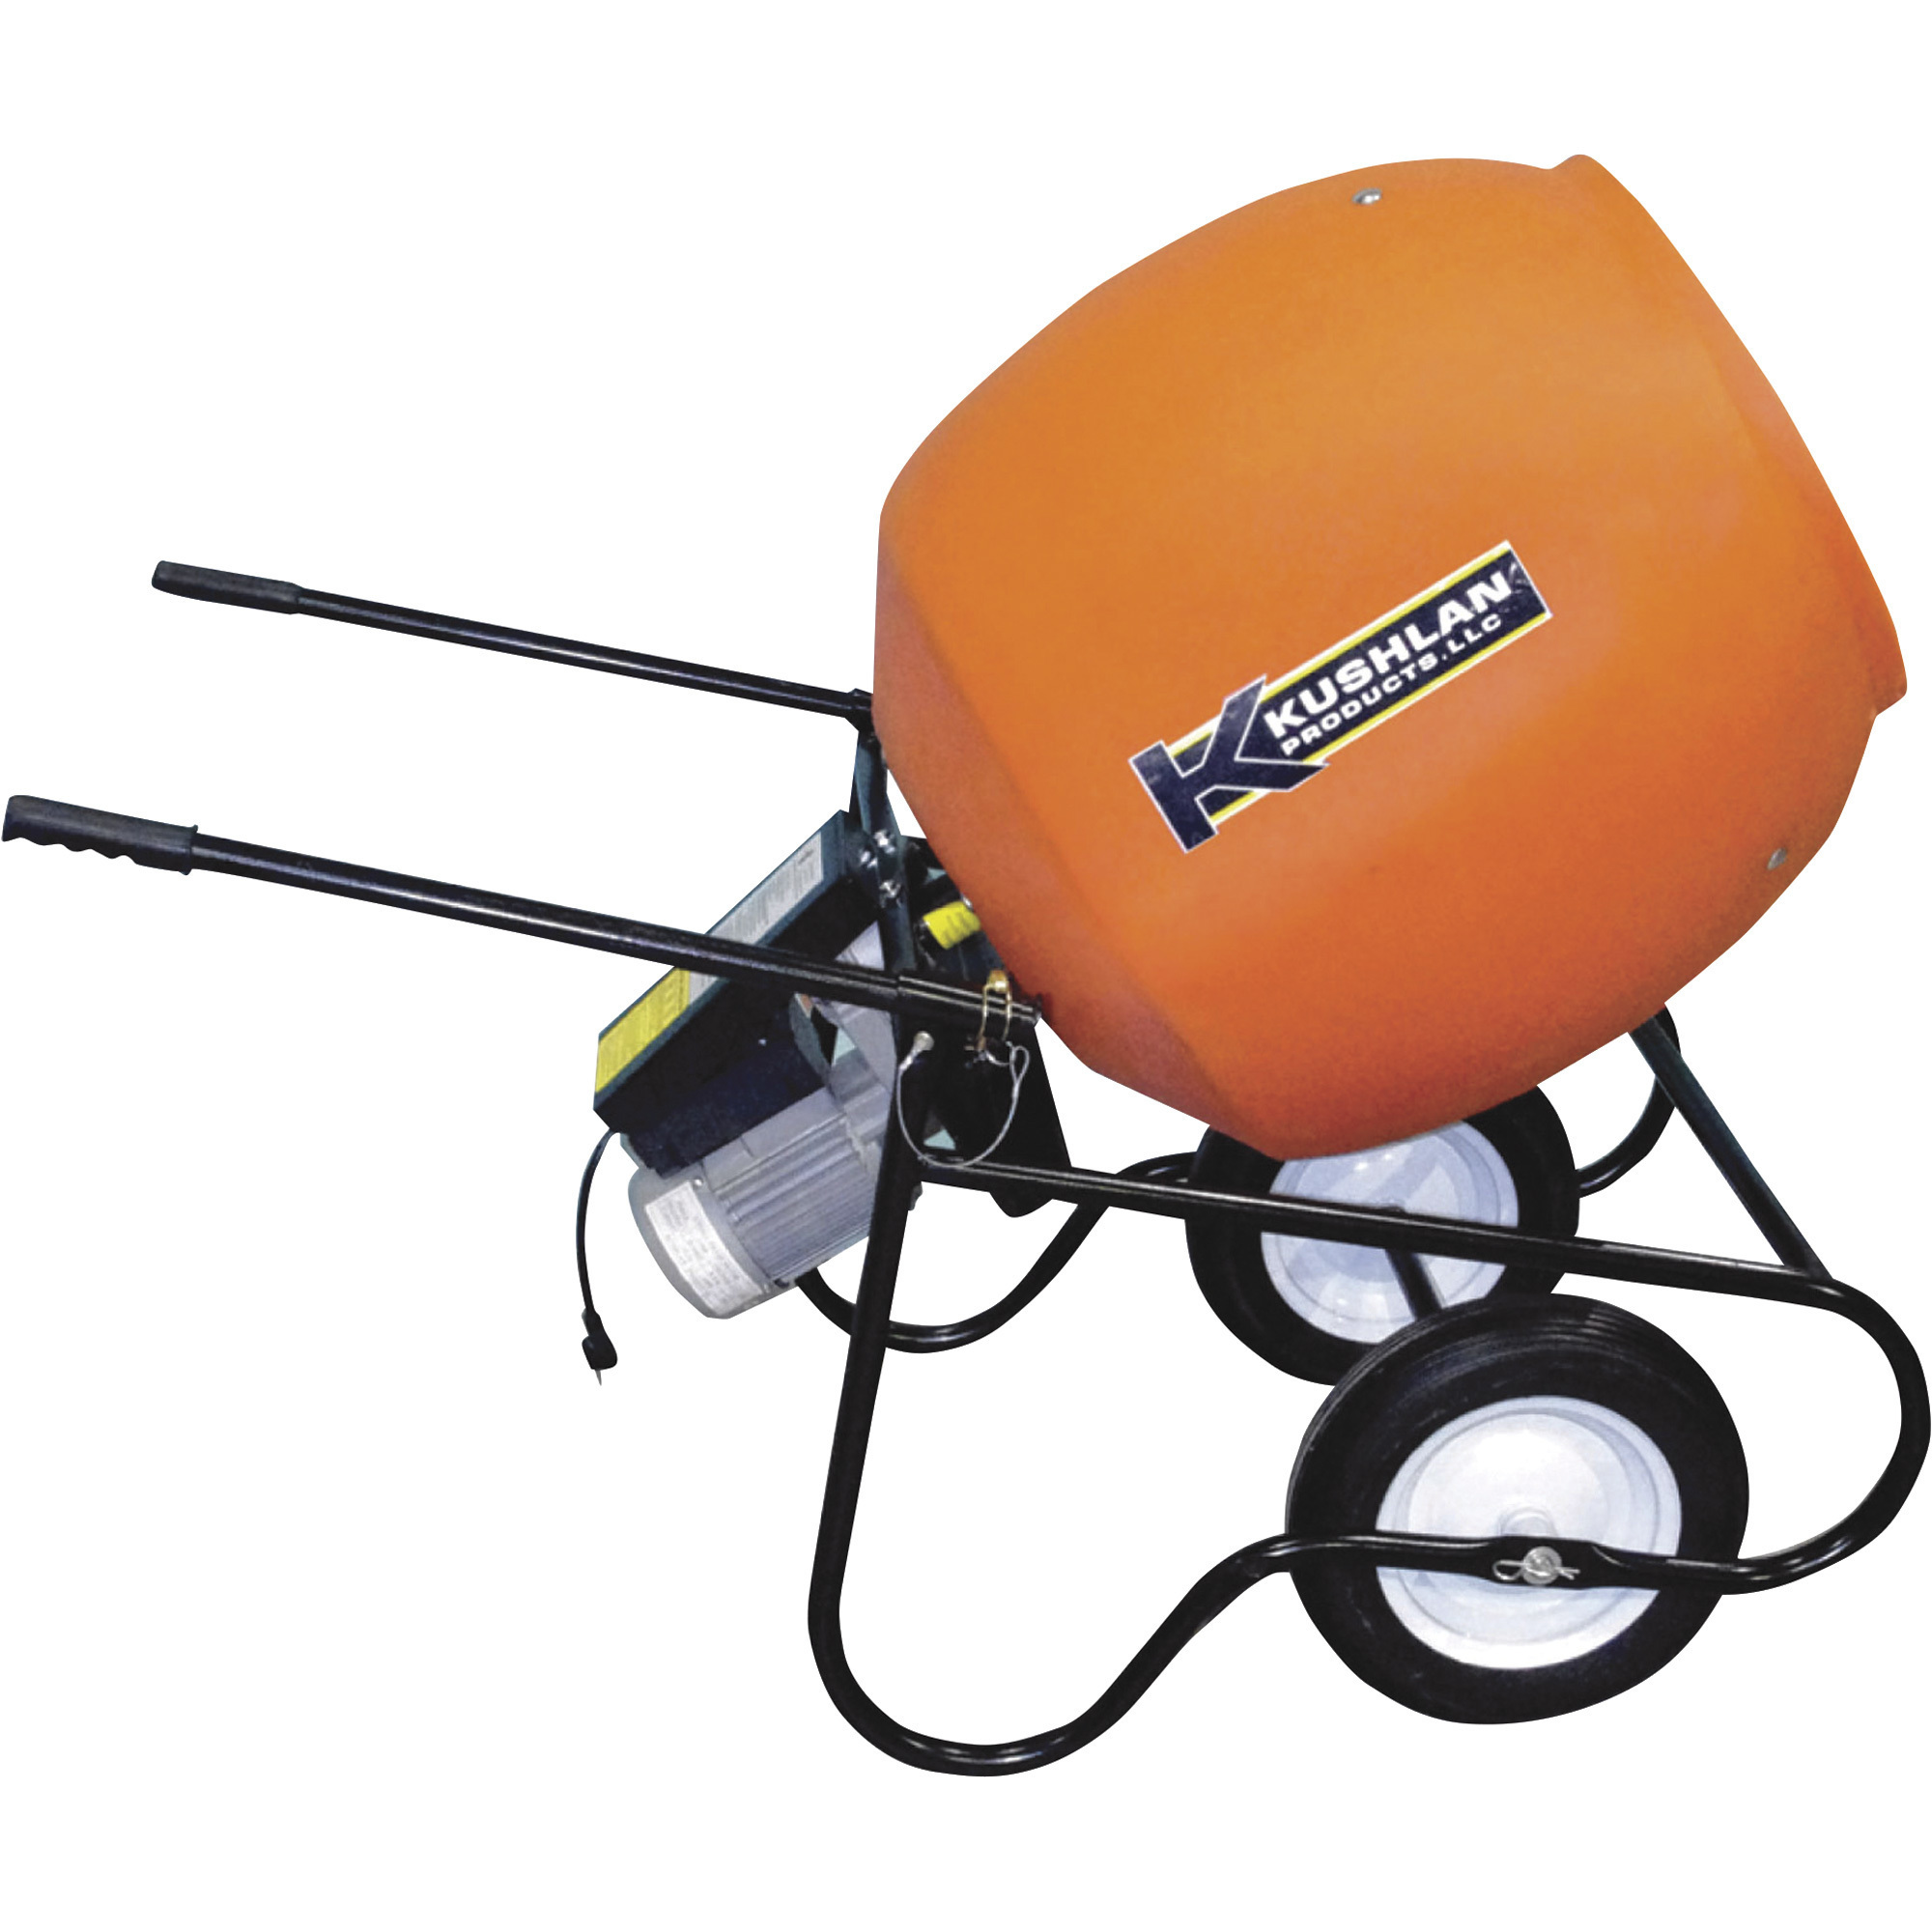 Kushlan Professional Portable Electric Direct Drive Cement Mixer â 6 Cubic Ft. Drum, Model 600DD